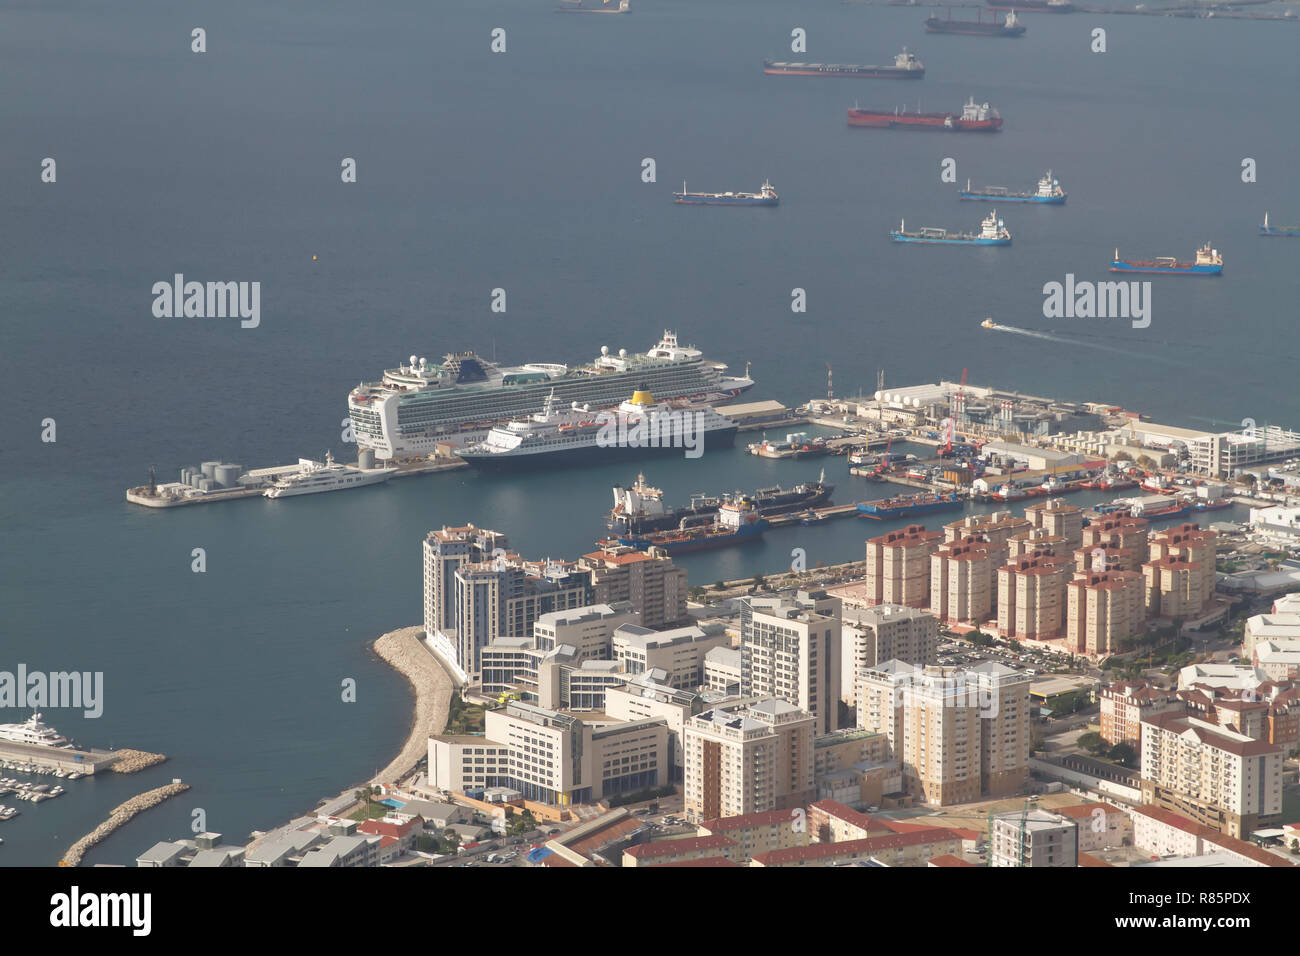 Gibraltar. 12th Dec 2018. With two large Cruise ships in port, passengers  flood Gibraltars Main street hoping to do some last minute Christmas  shopping along with bagging some duty free souvenirs.Credit: Keith